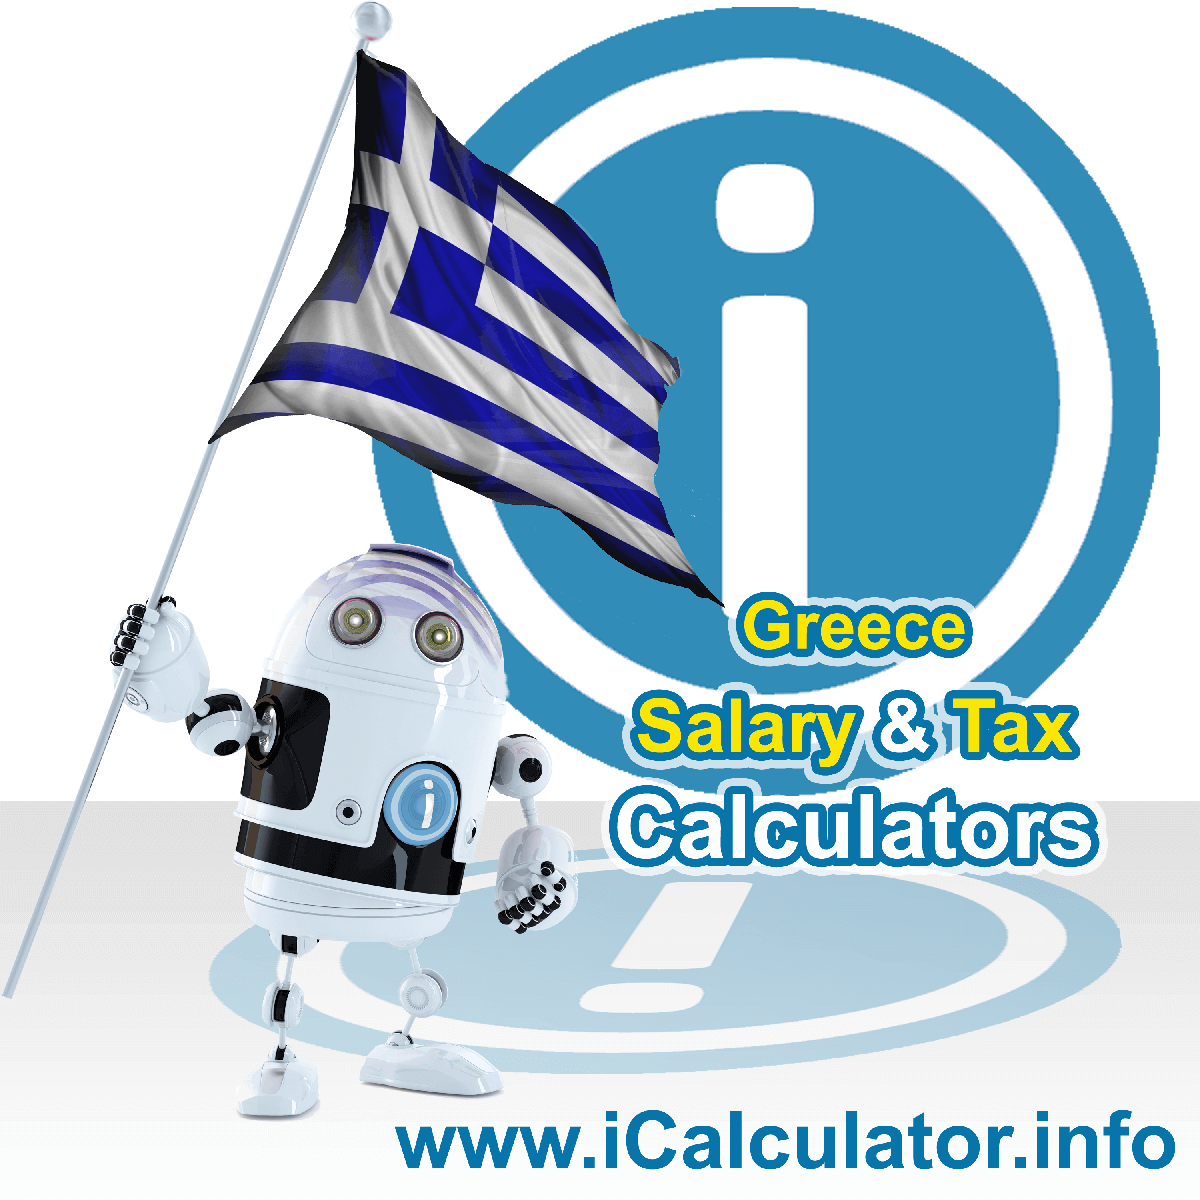 Greece Tax Calculator. This image shows the Greece flag and information relating to the tax formula for the Greece Salary Calculator